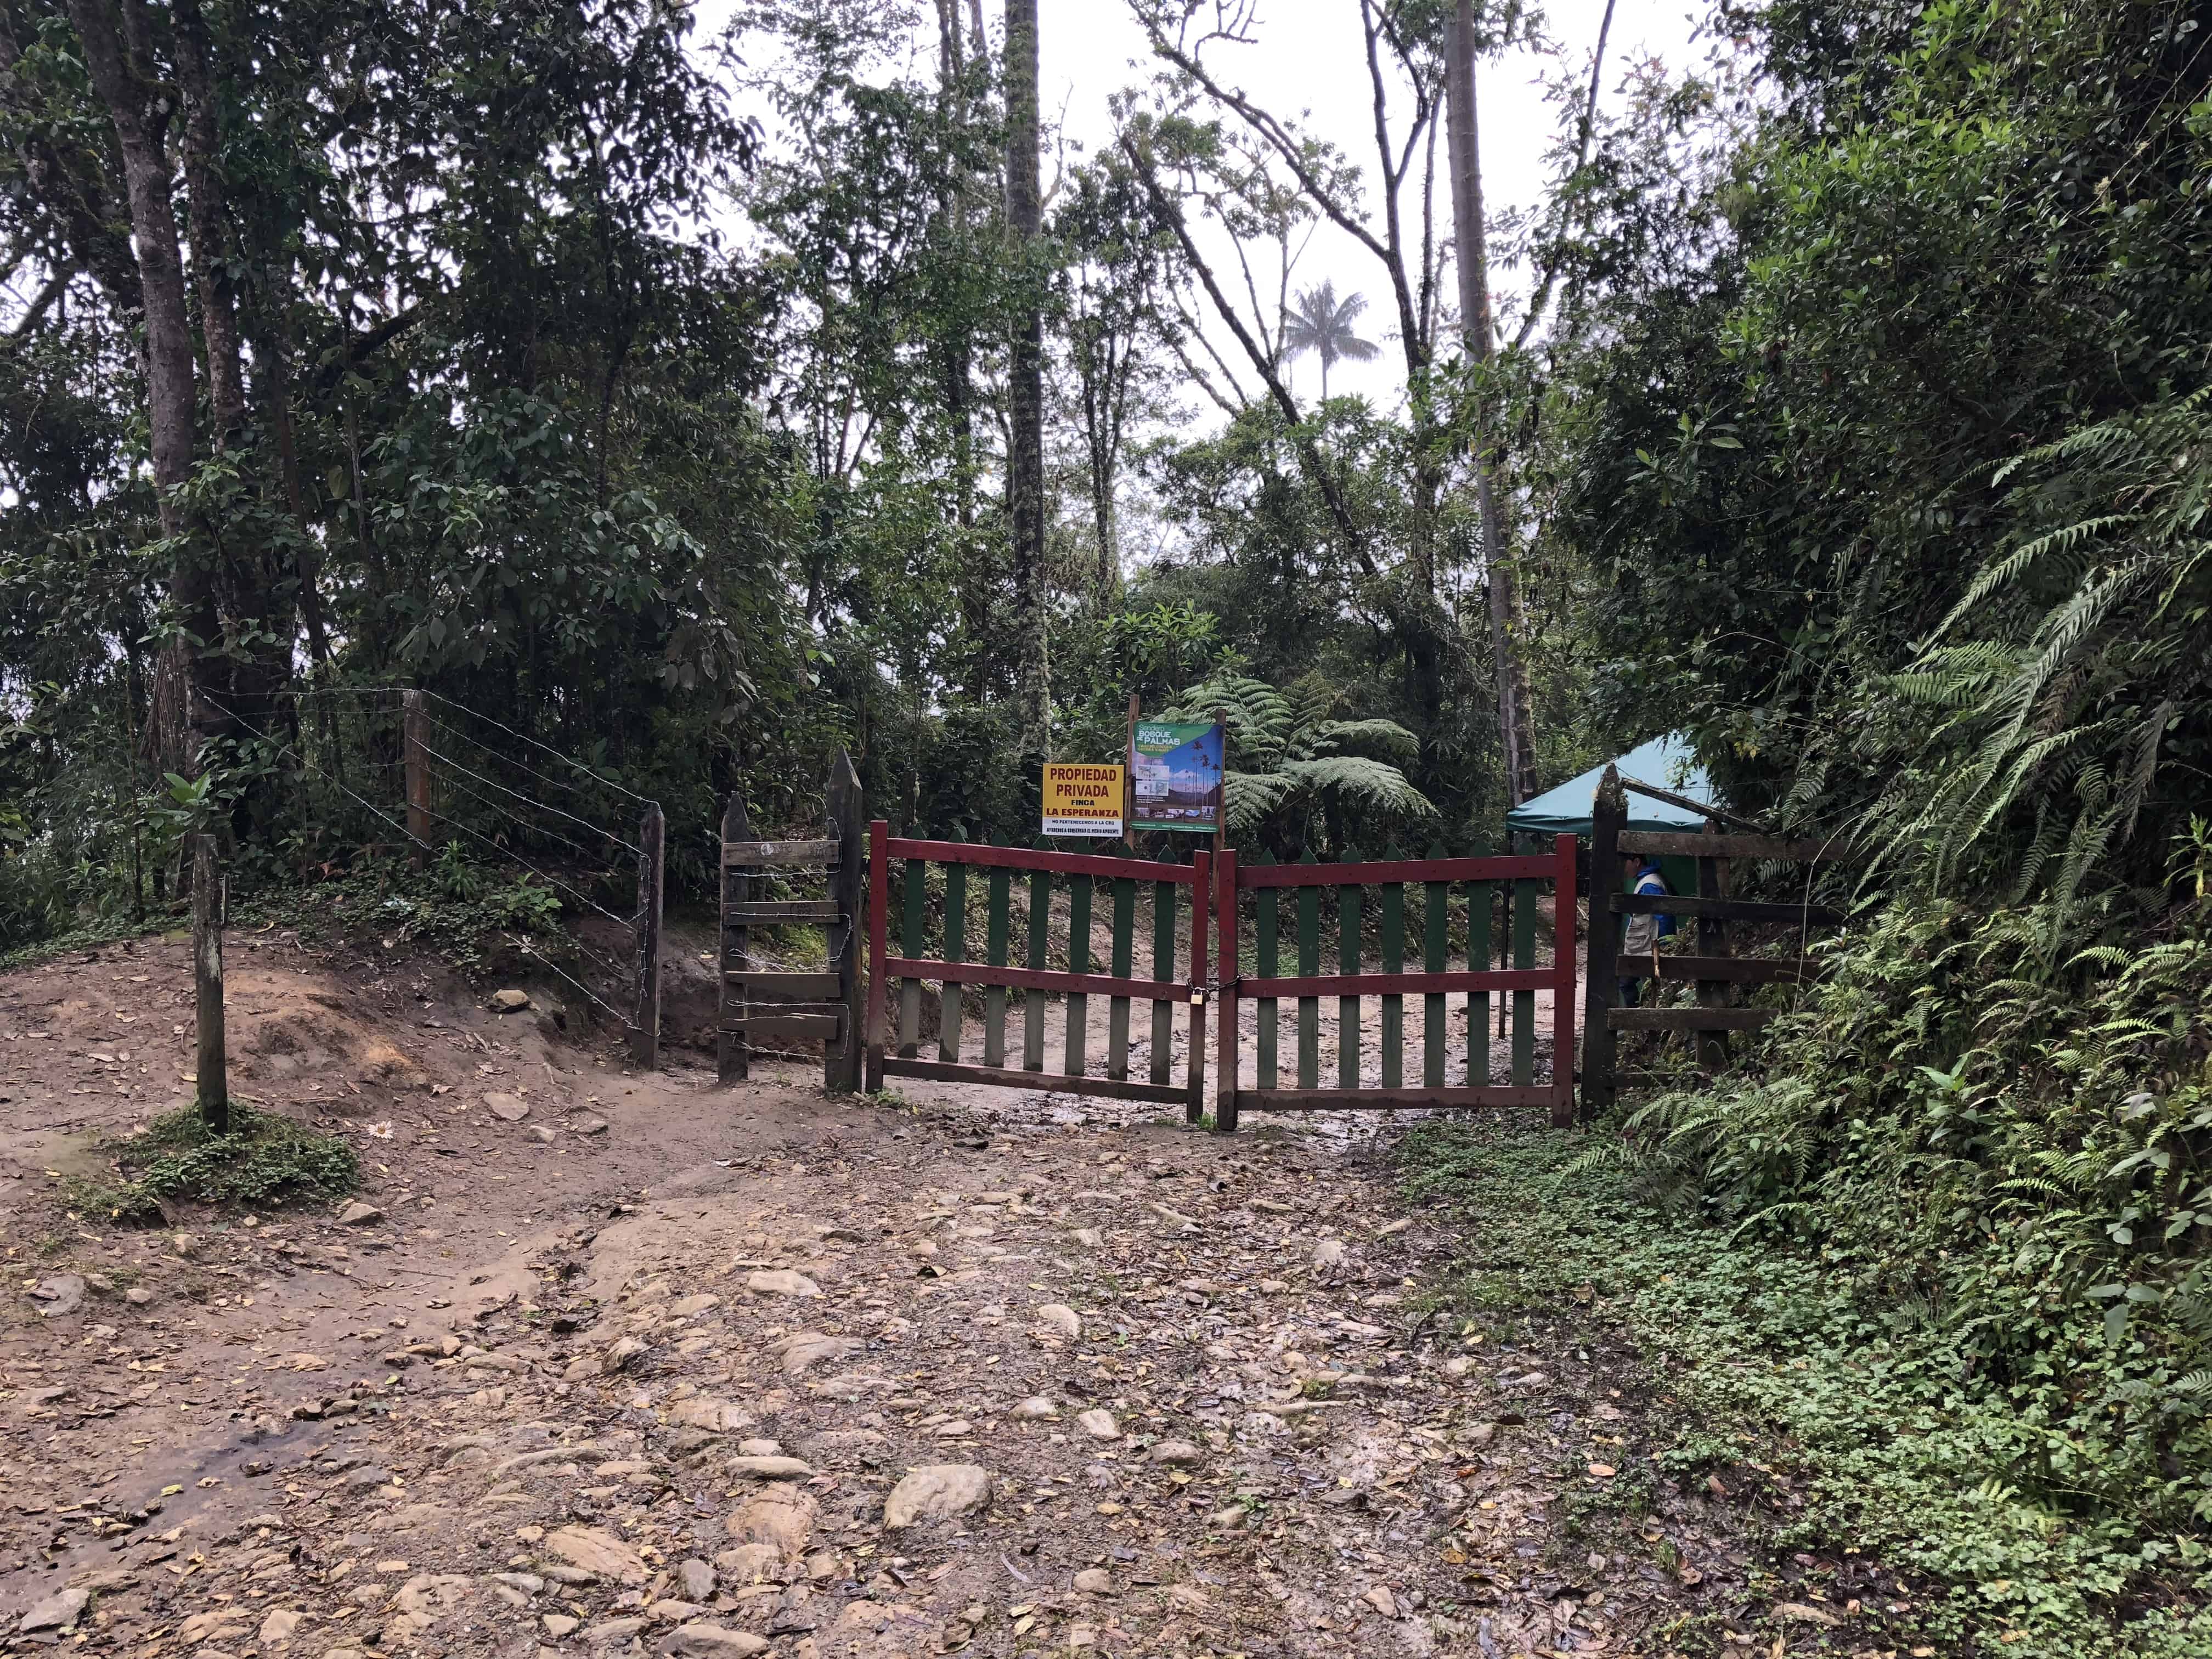 Checkpoint at Cocora Valley in Quindío, Colombia